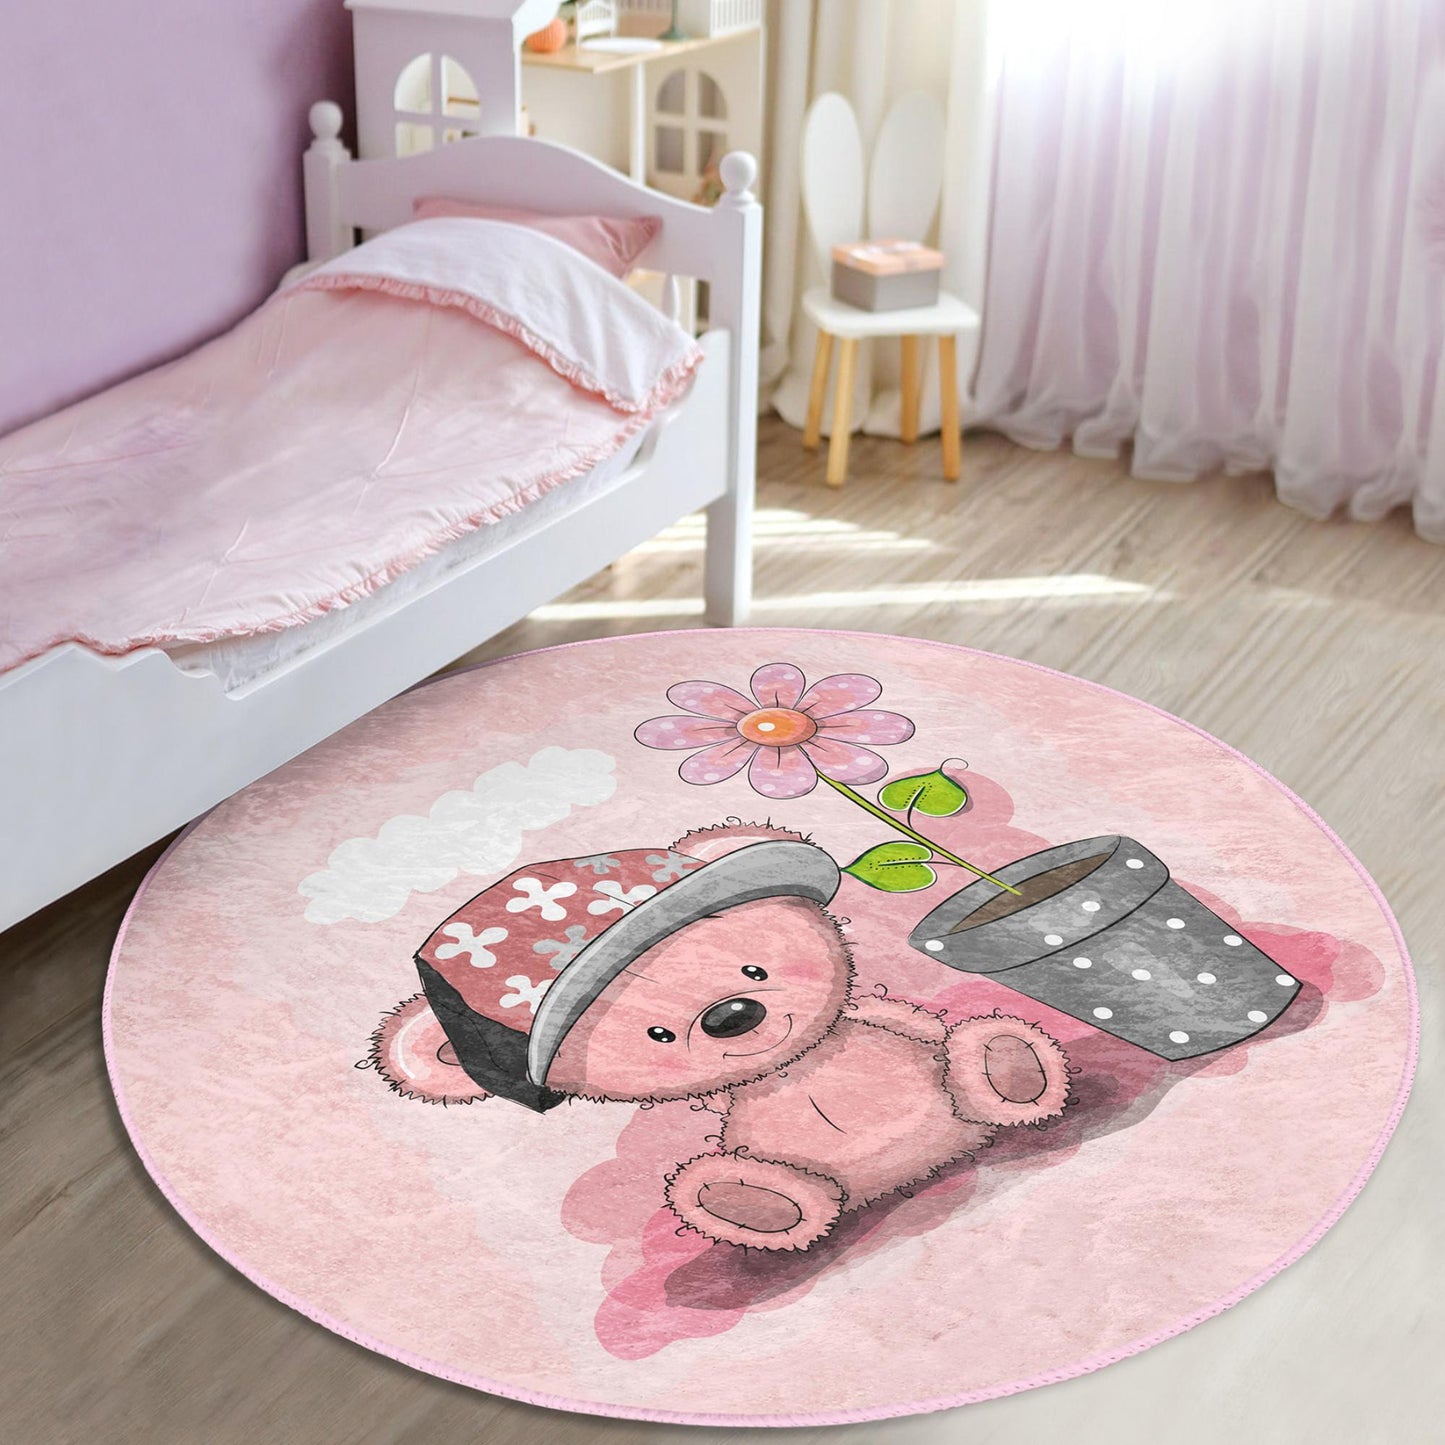 Sweet bear-themed rug in pink perfect for adding charm to girls' spaces.